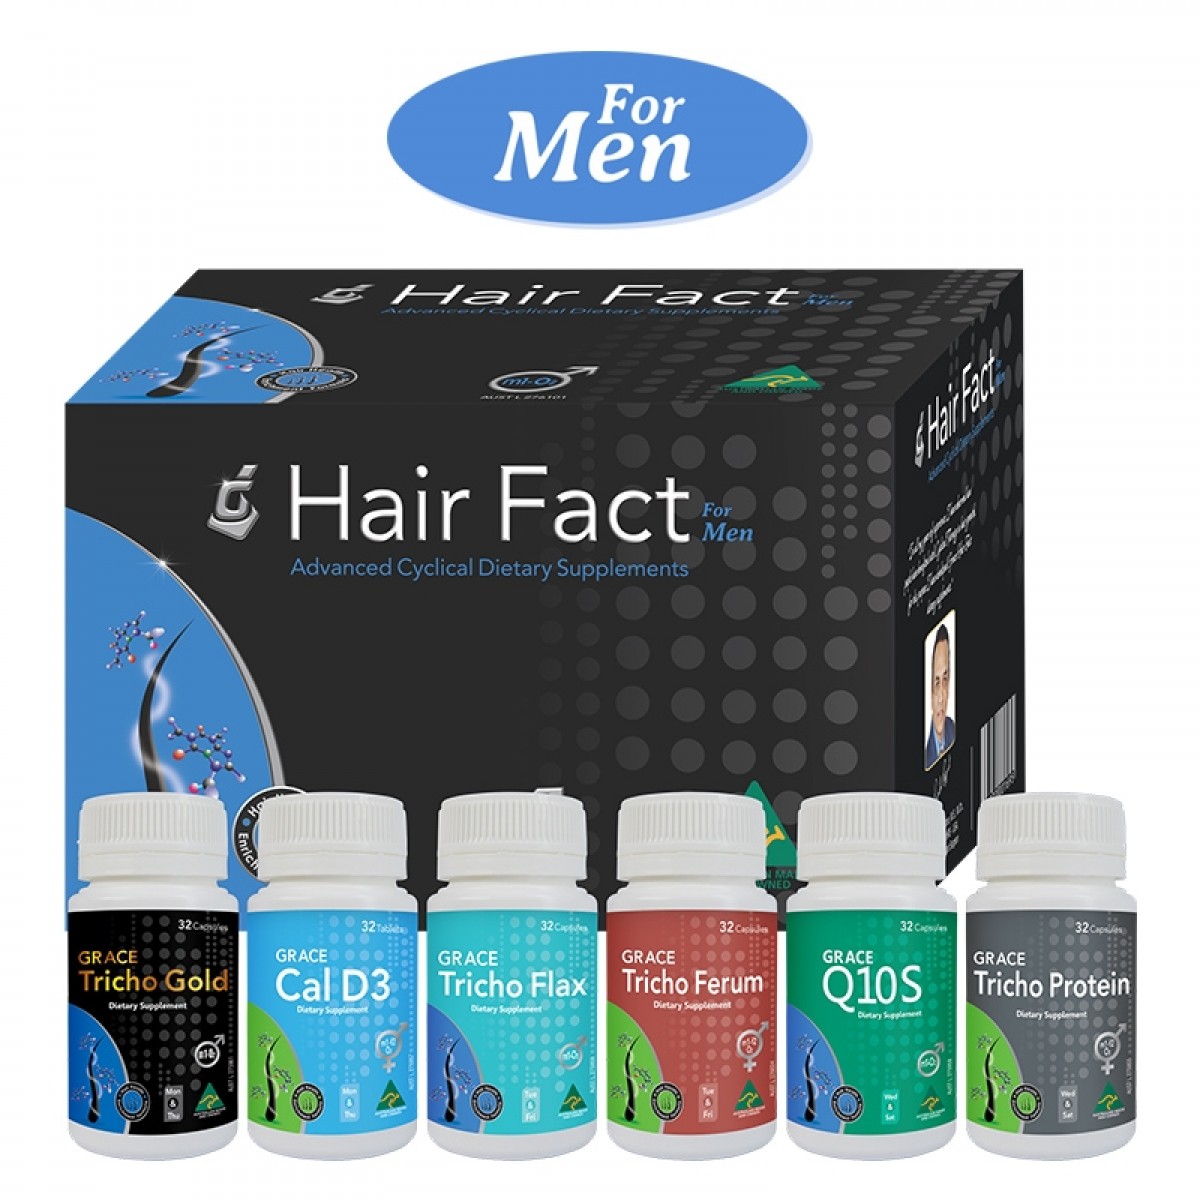 Hair Facts V1o2, Tablet, Packaging Size: Kit